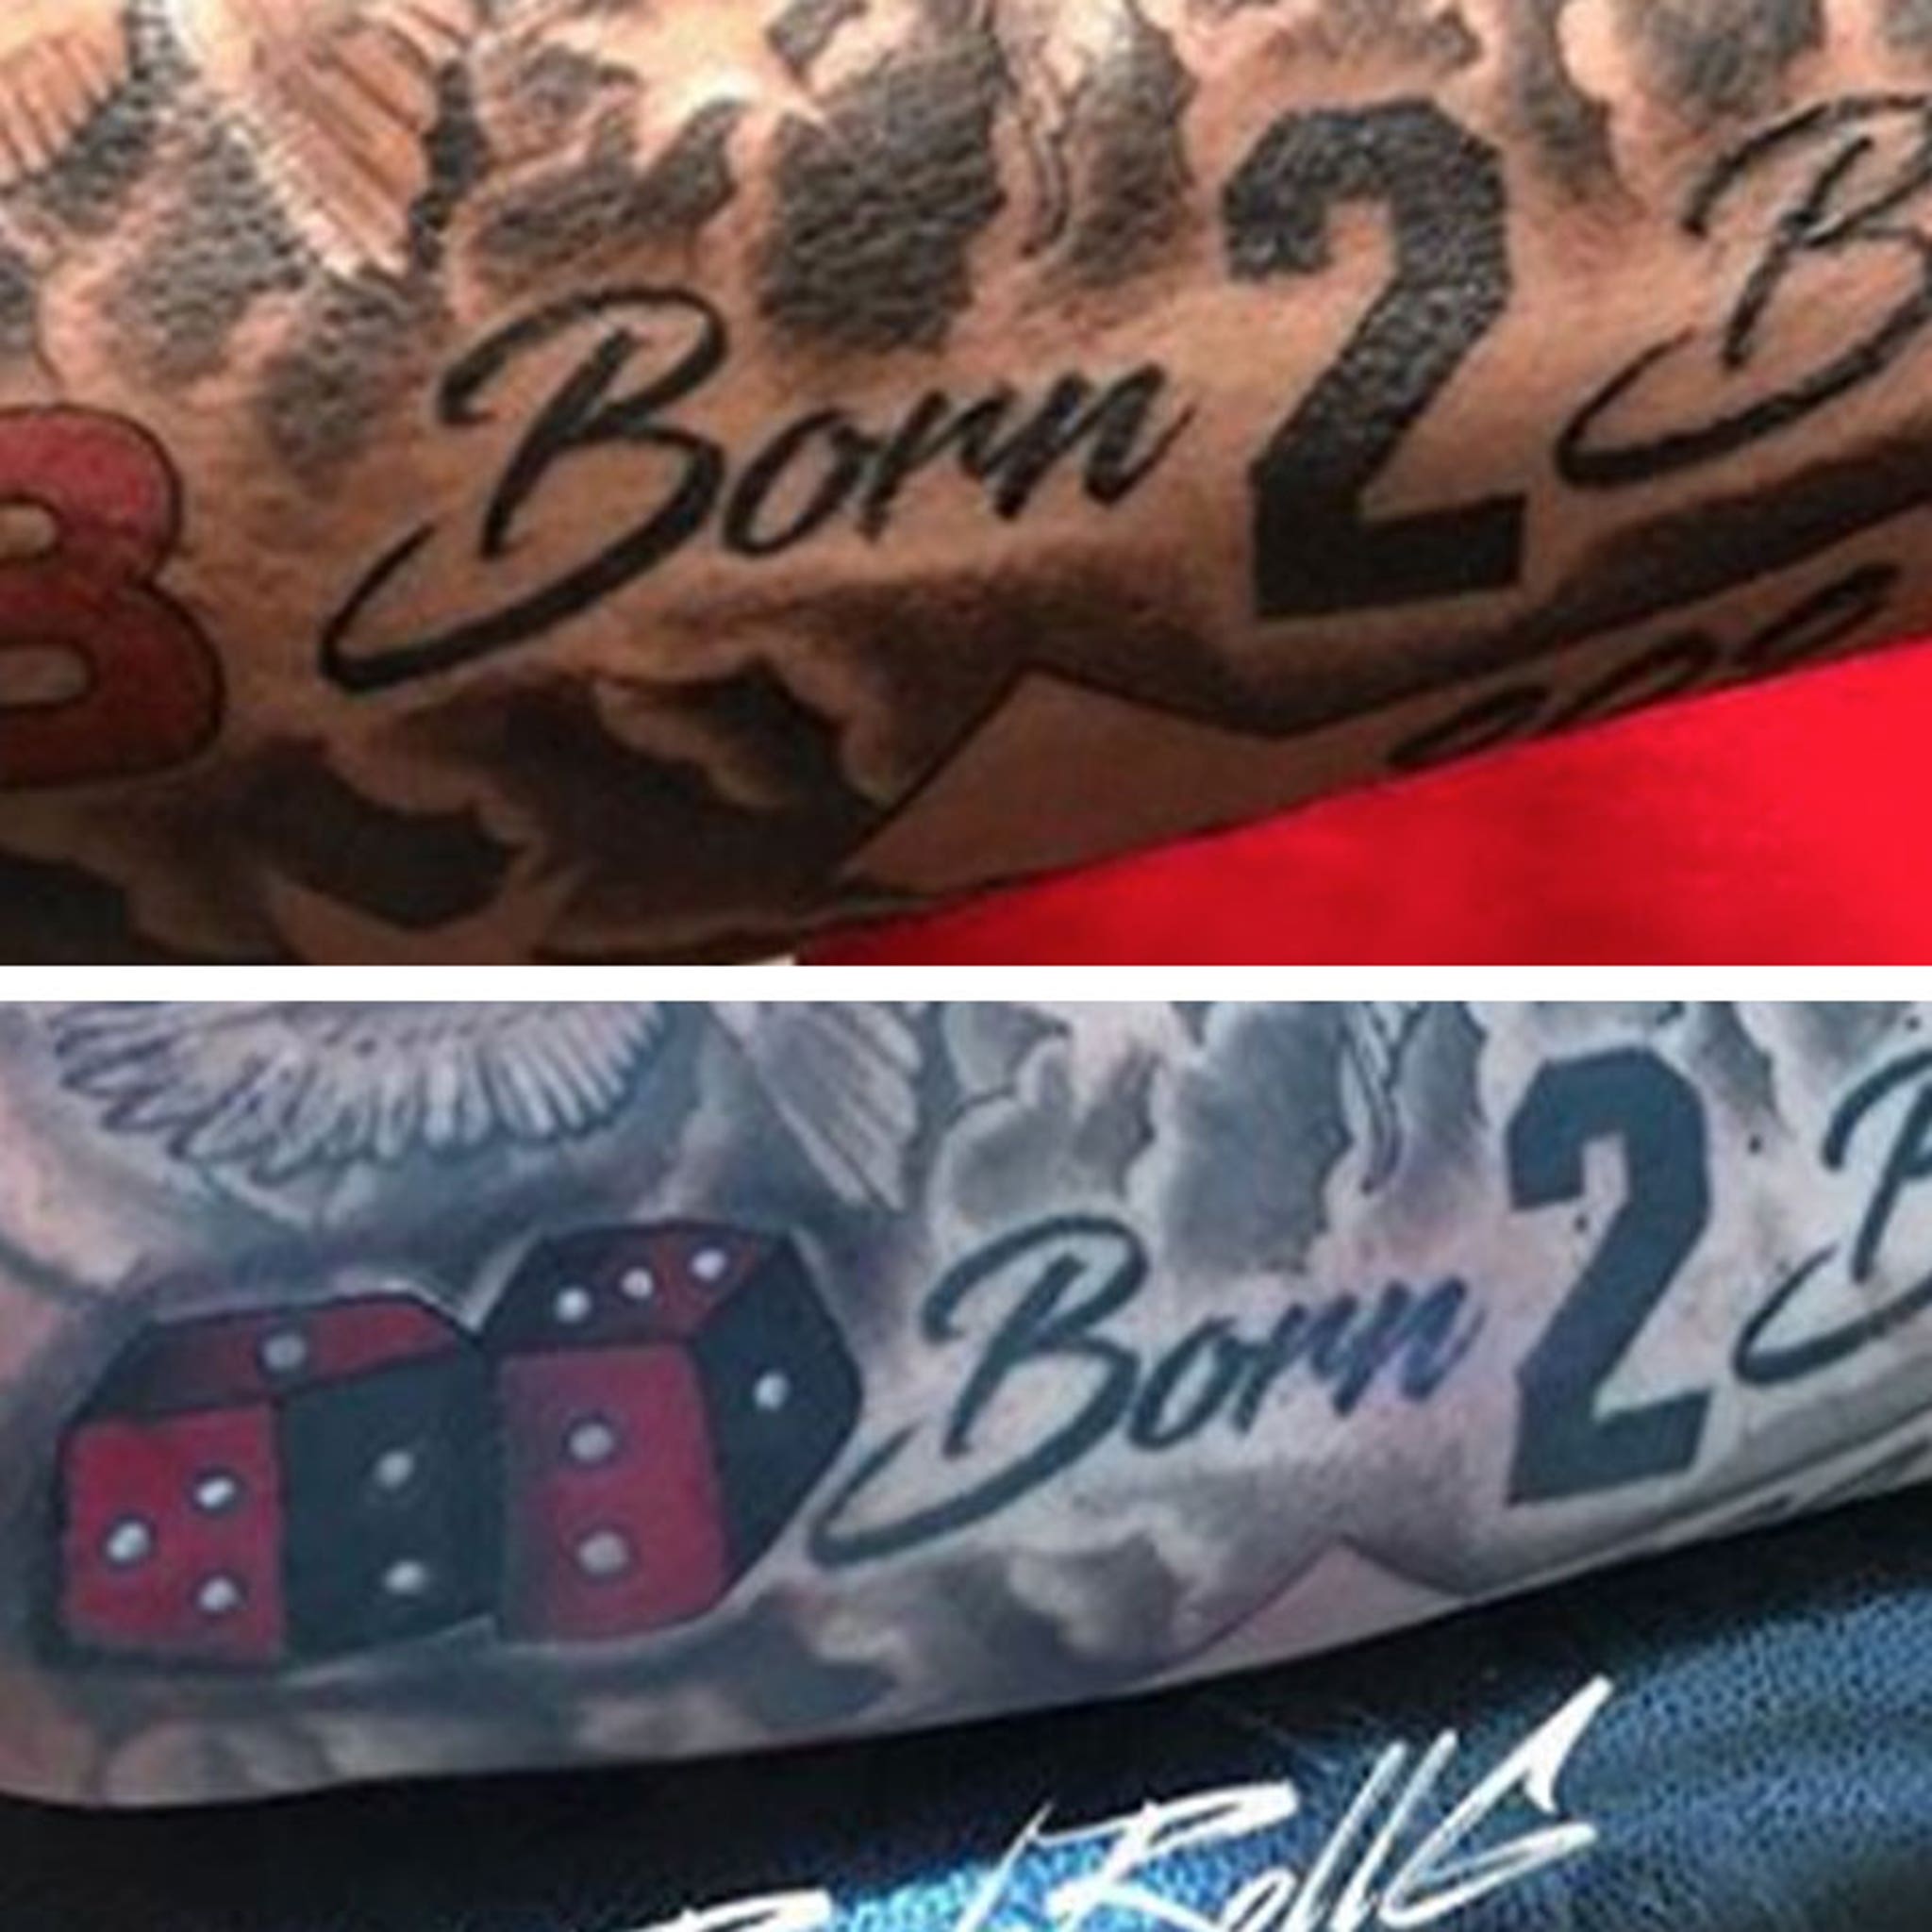 Big Baller, Ink: Over LaVar's objections, Lonzo Ball gets tattoos